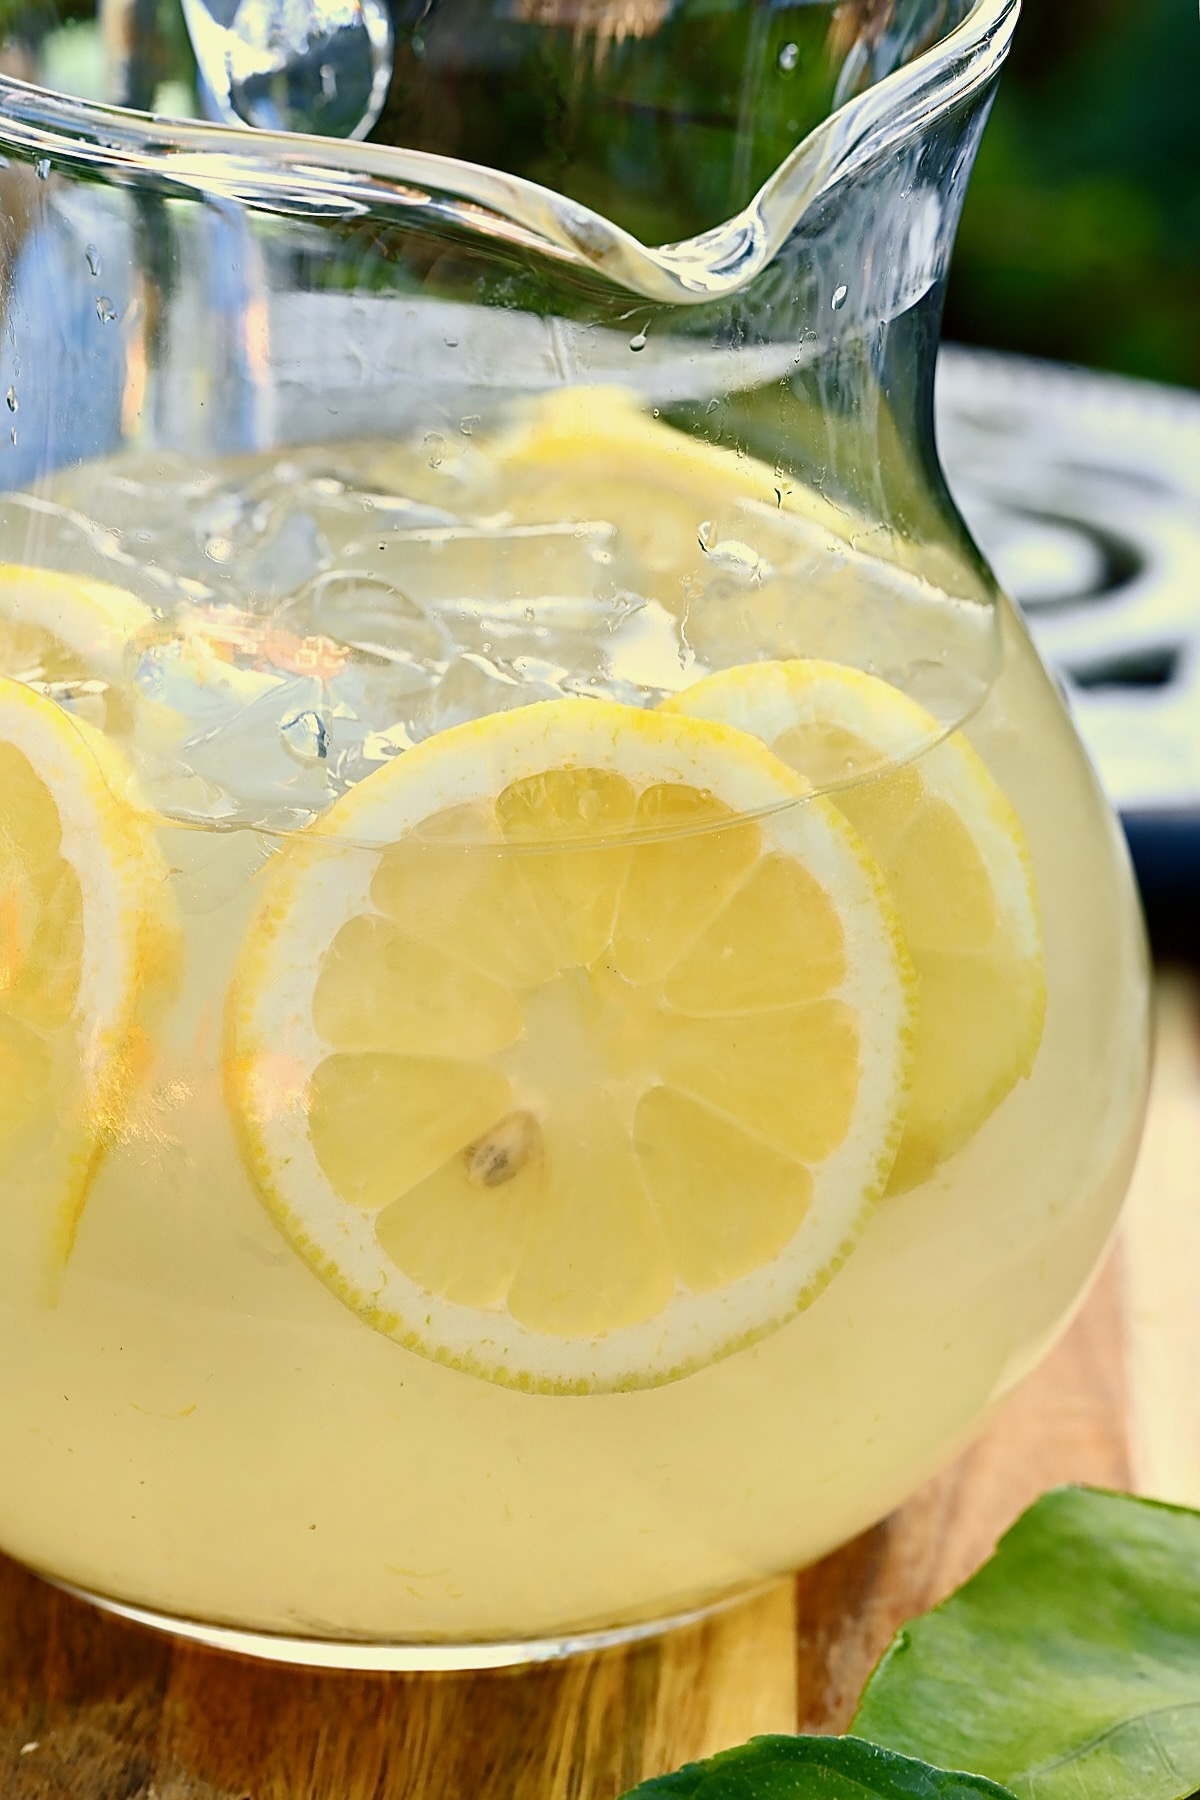 A pitcher with homemade lemonade and slices of lemon